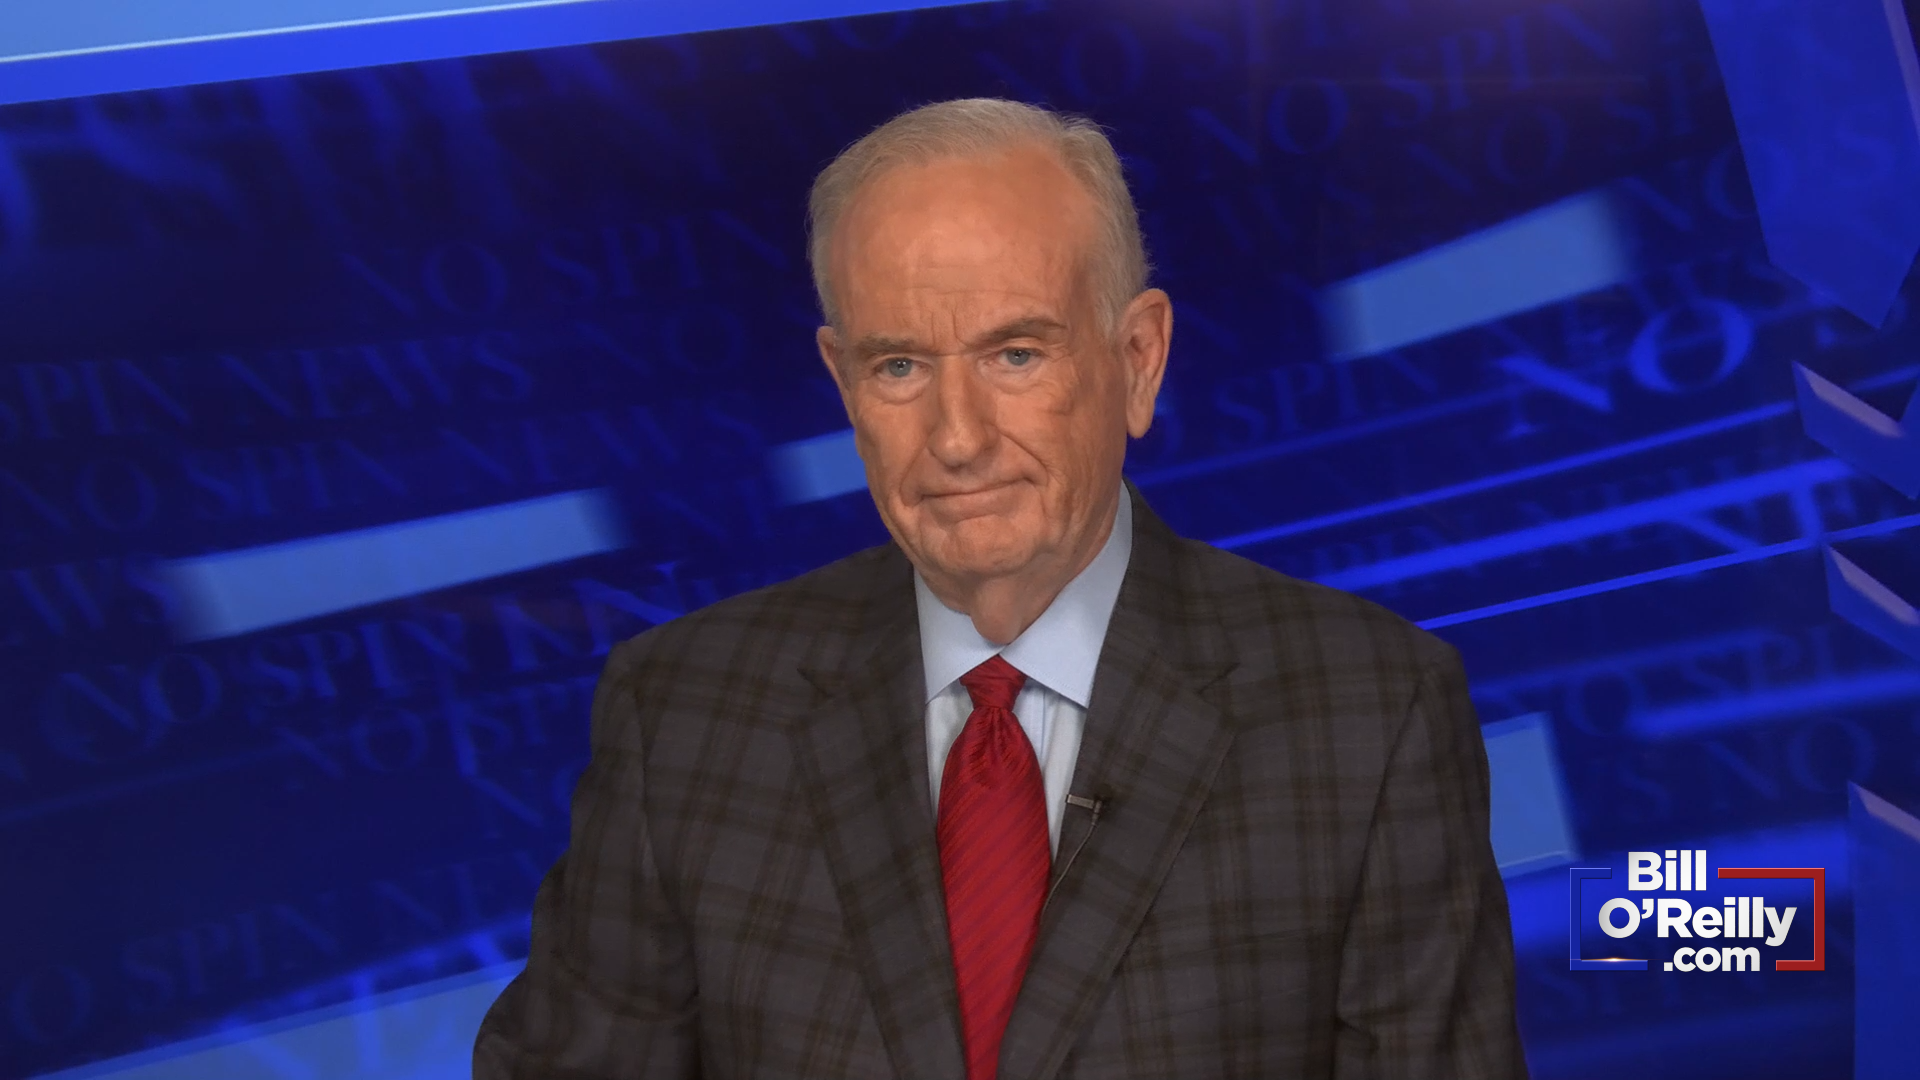 Highlights from O'Reilly's No Spin News